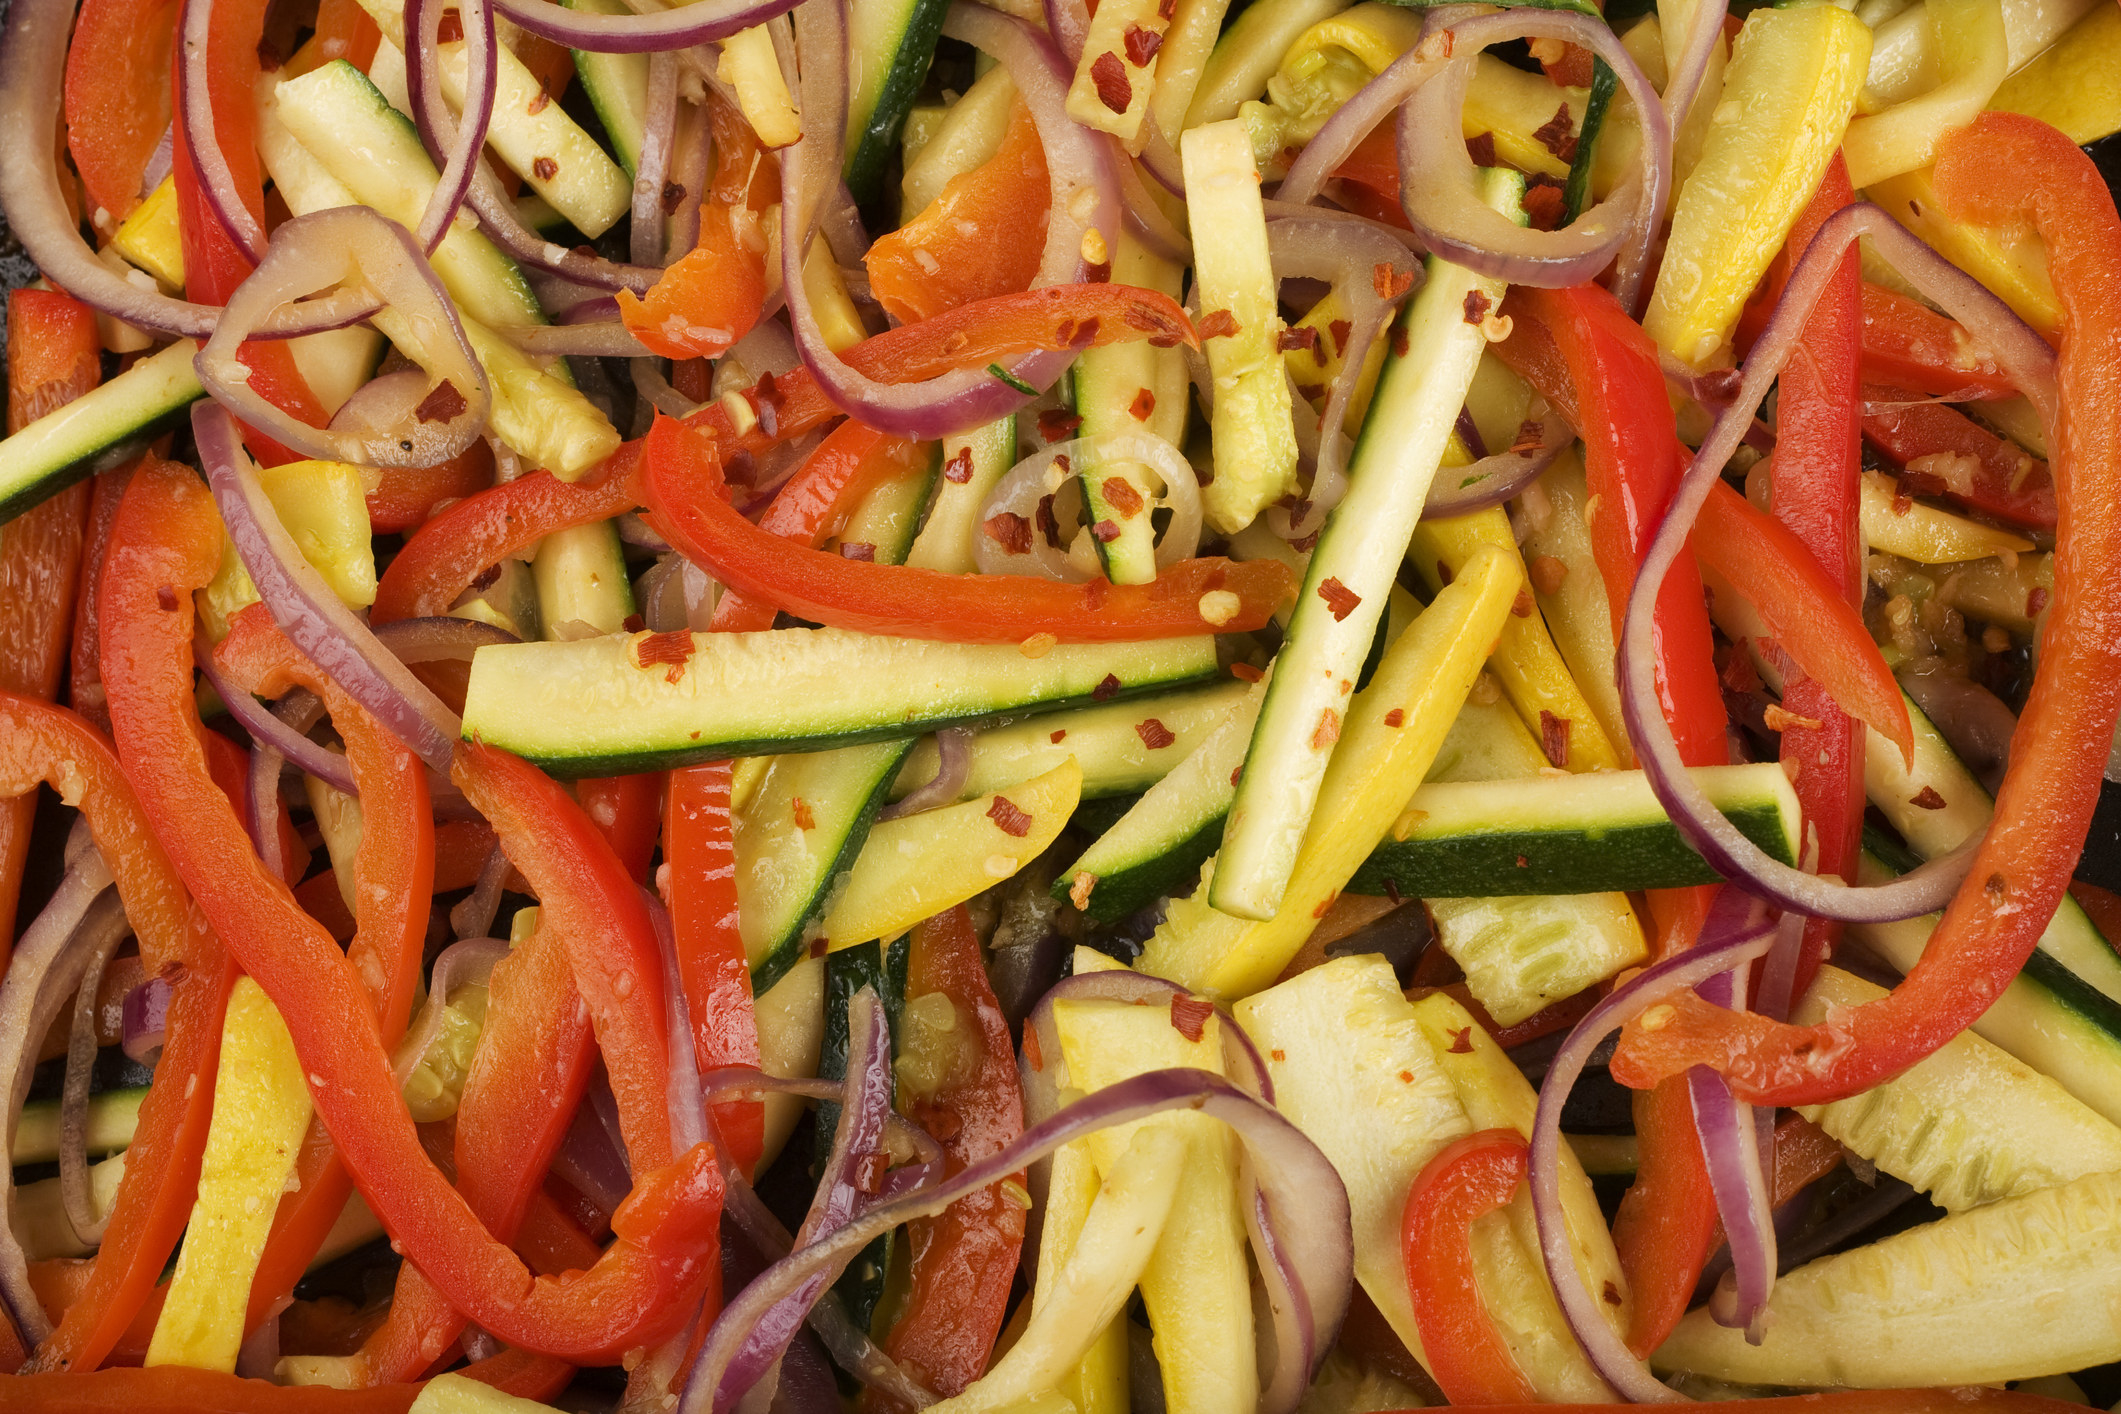 Vegetables with red pepper flakes.